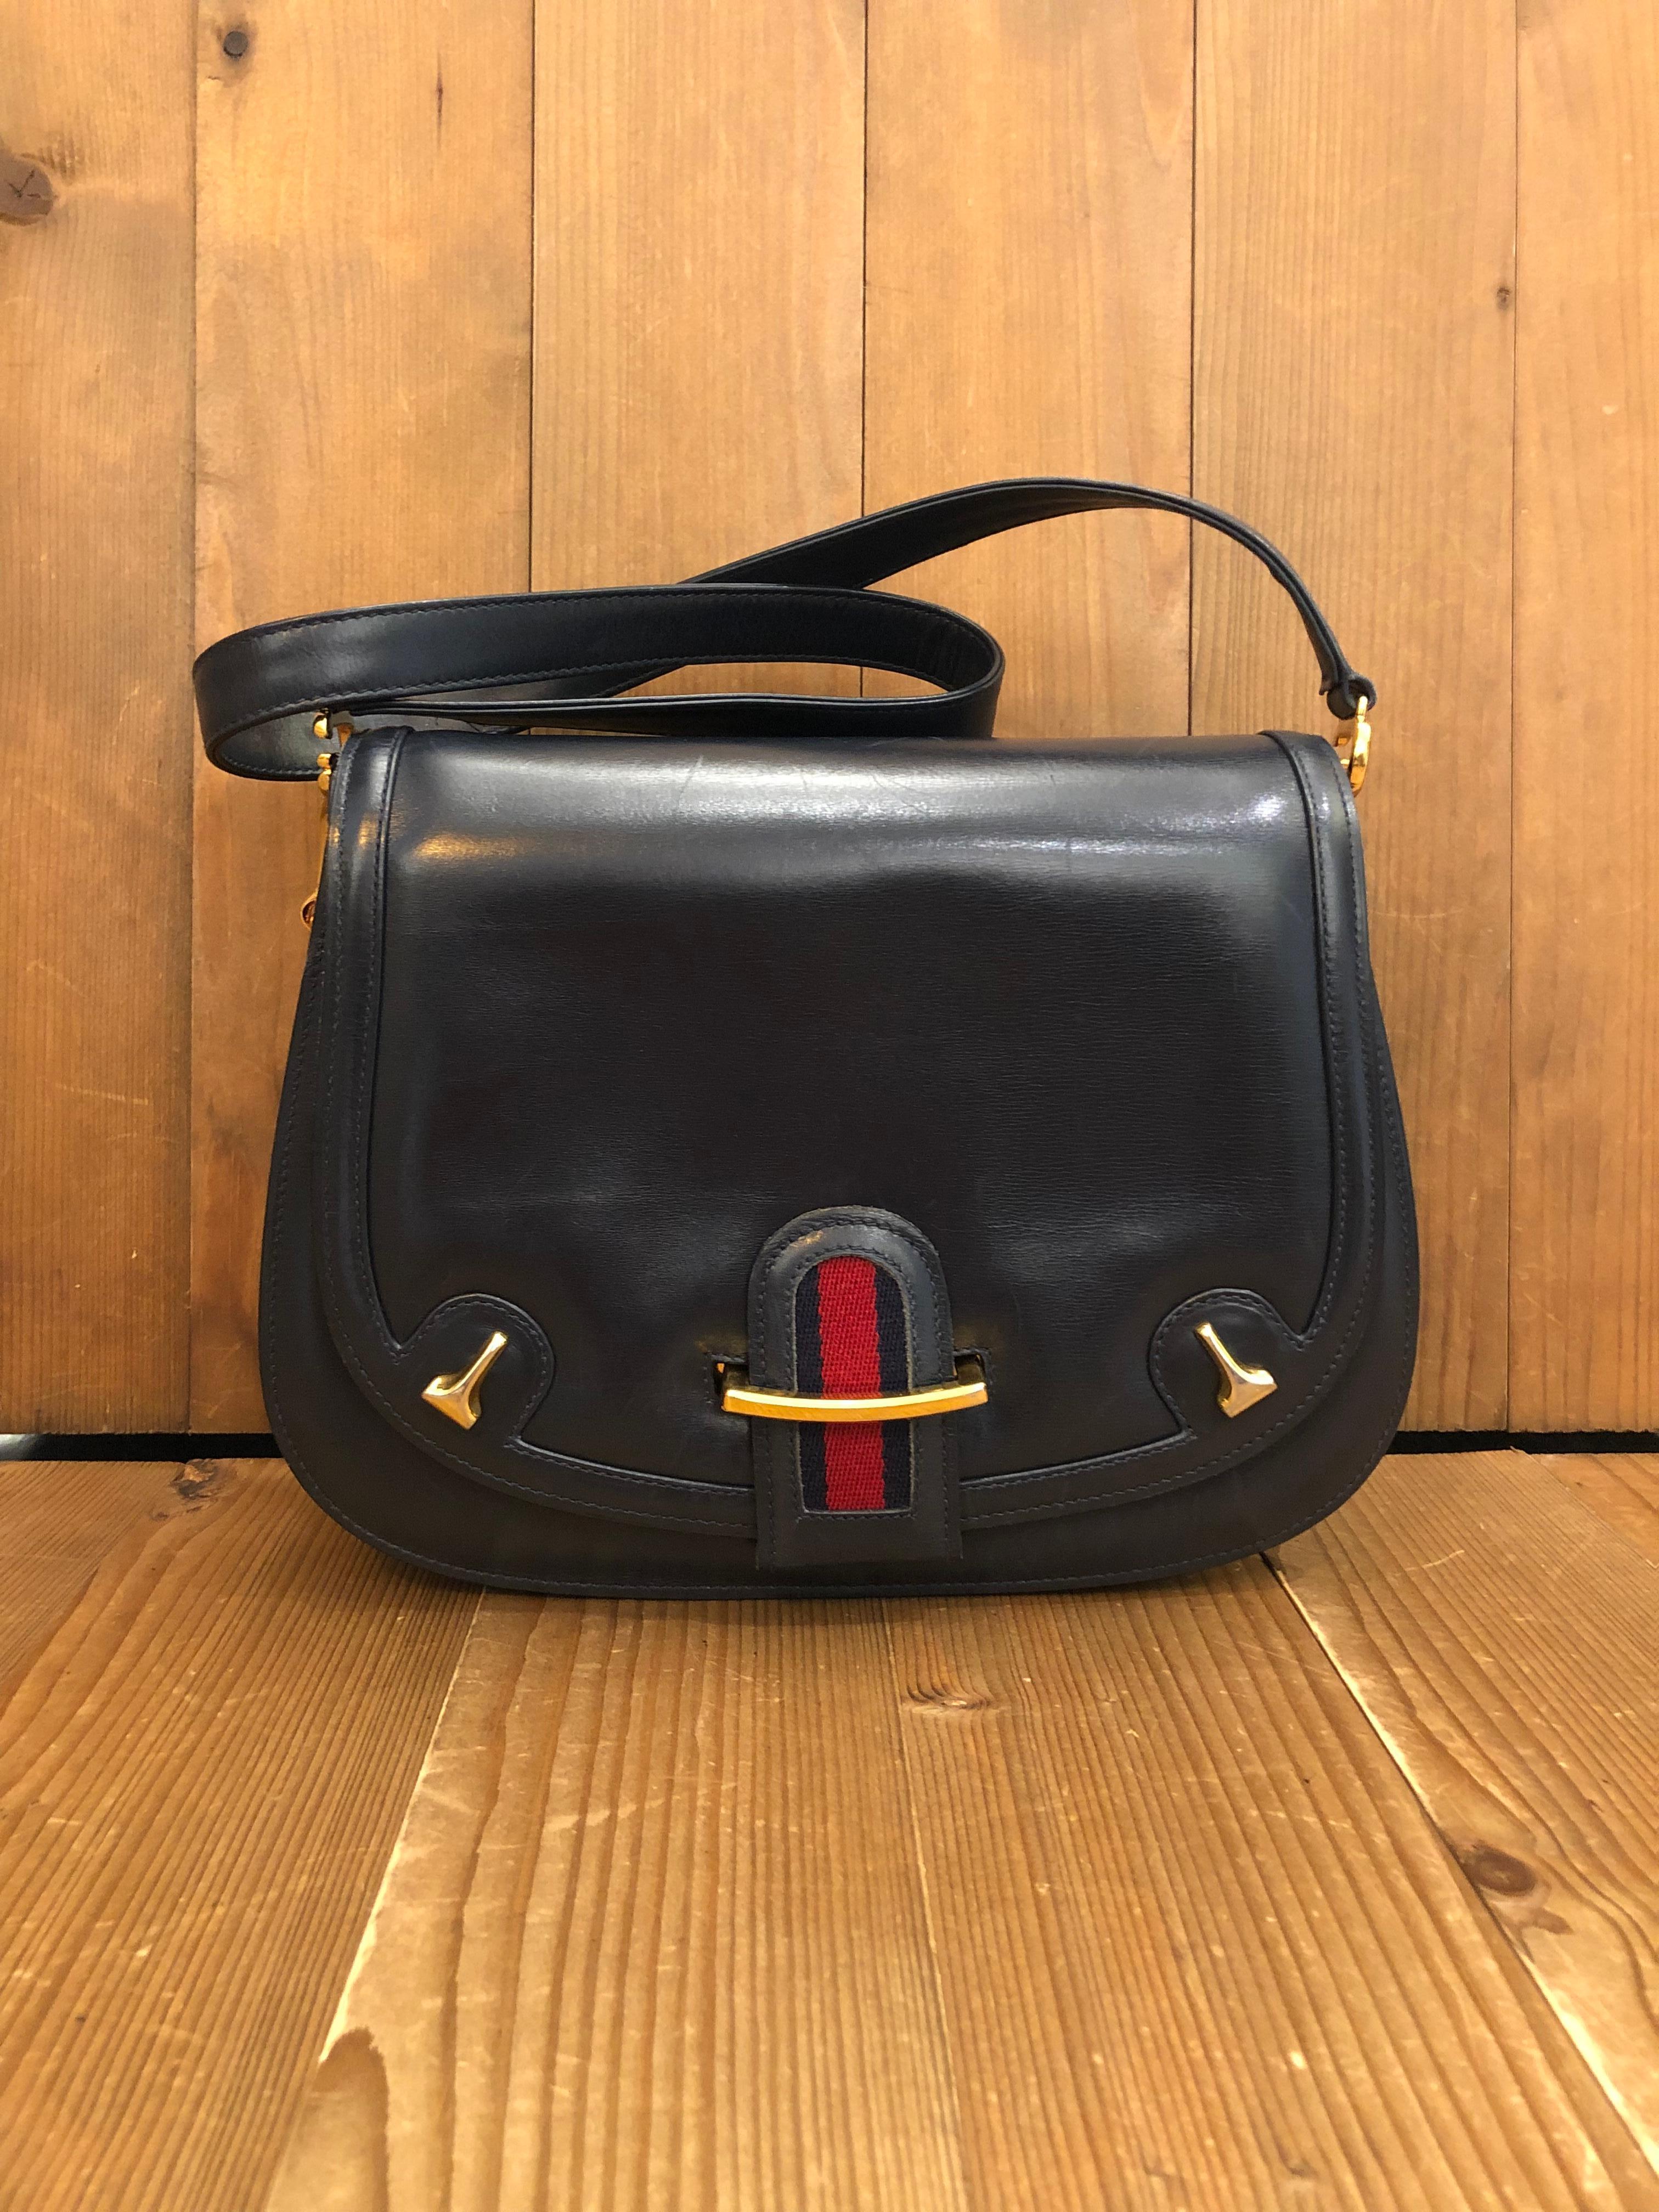 This 1970s vintage Gucci shoulder bag is crafted of smooth leather in black featuring Gucci’s iconic red/blue web buckle adorned with gold toned equestrian accents. Front flap closure opens to a black leather interior with zippered and open pockets.